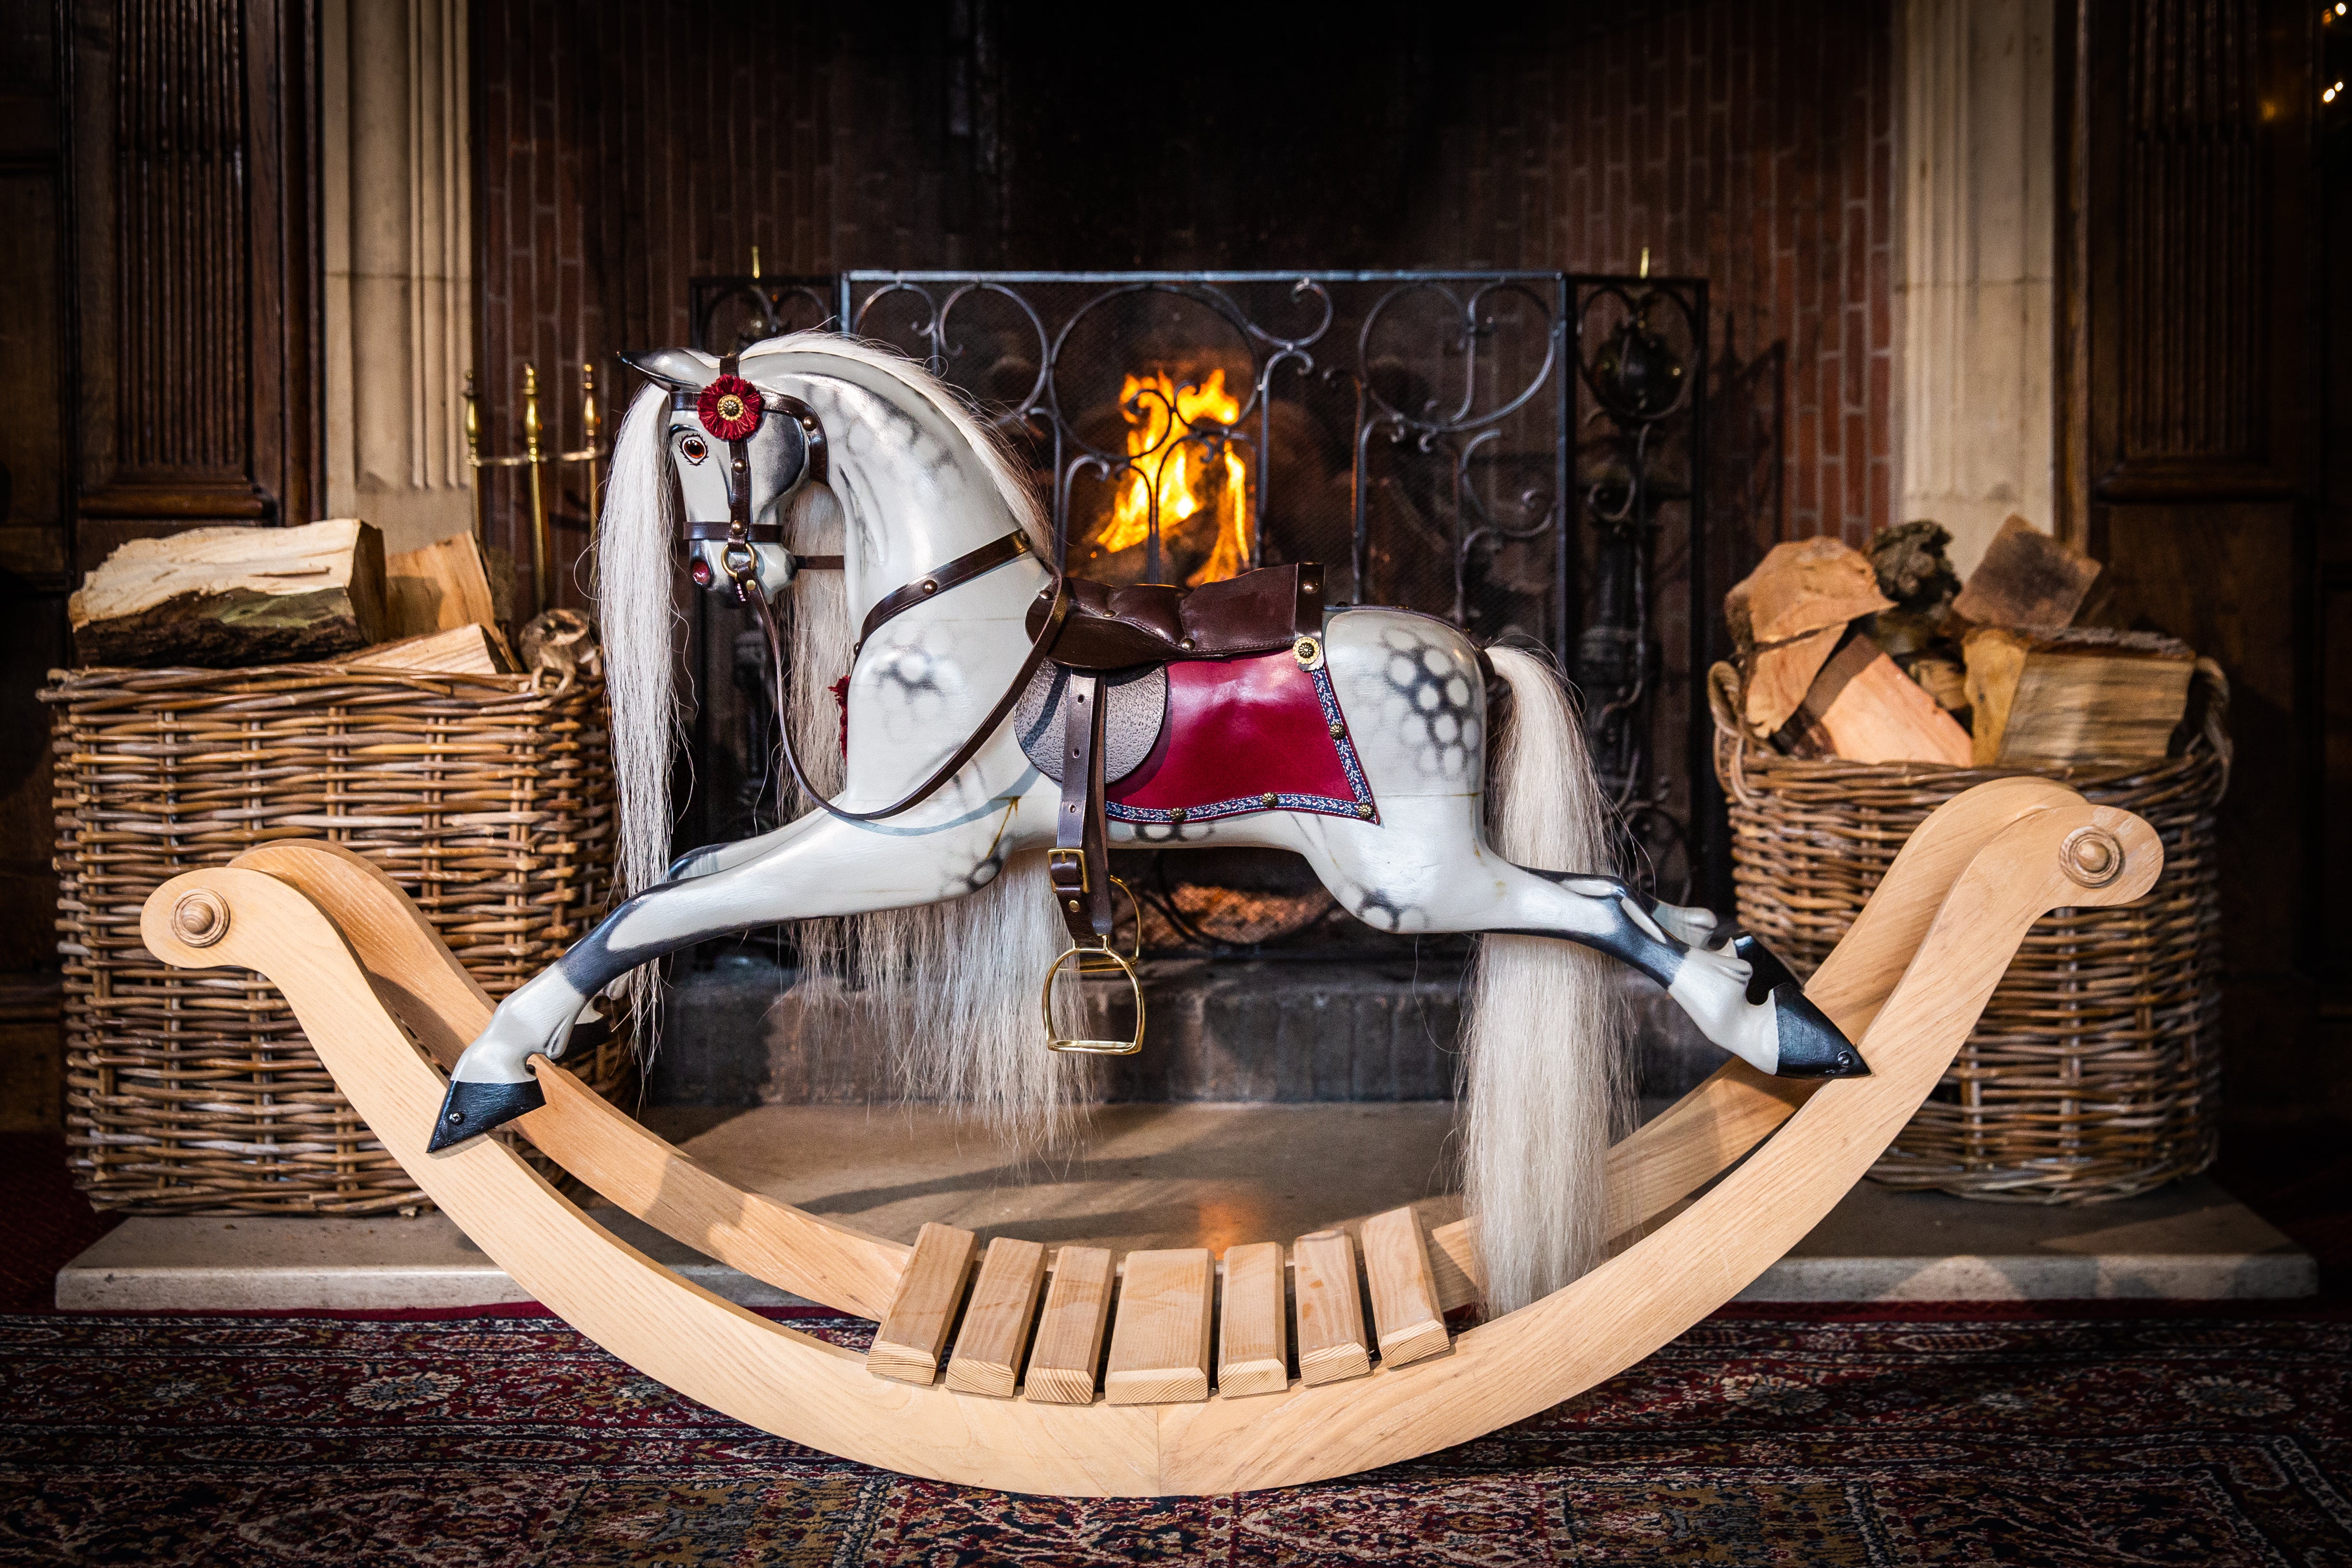 Rocking their craft: if it’s to do with rocking horses, they do it